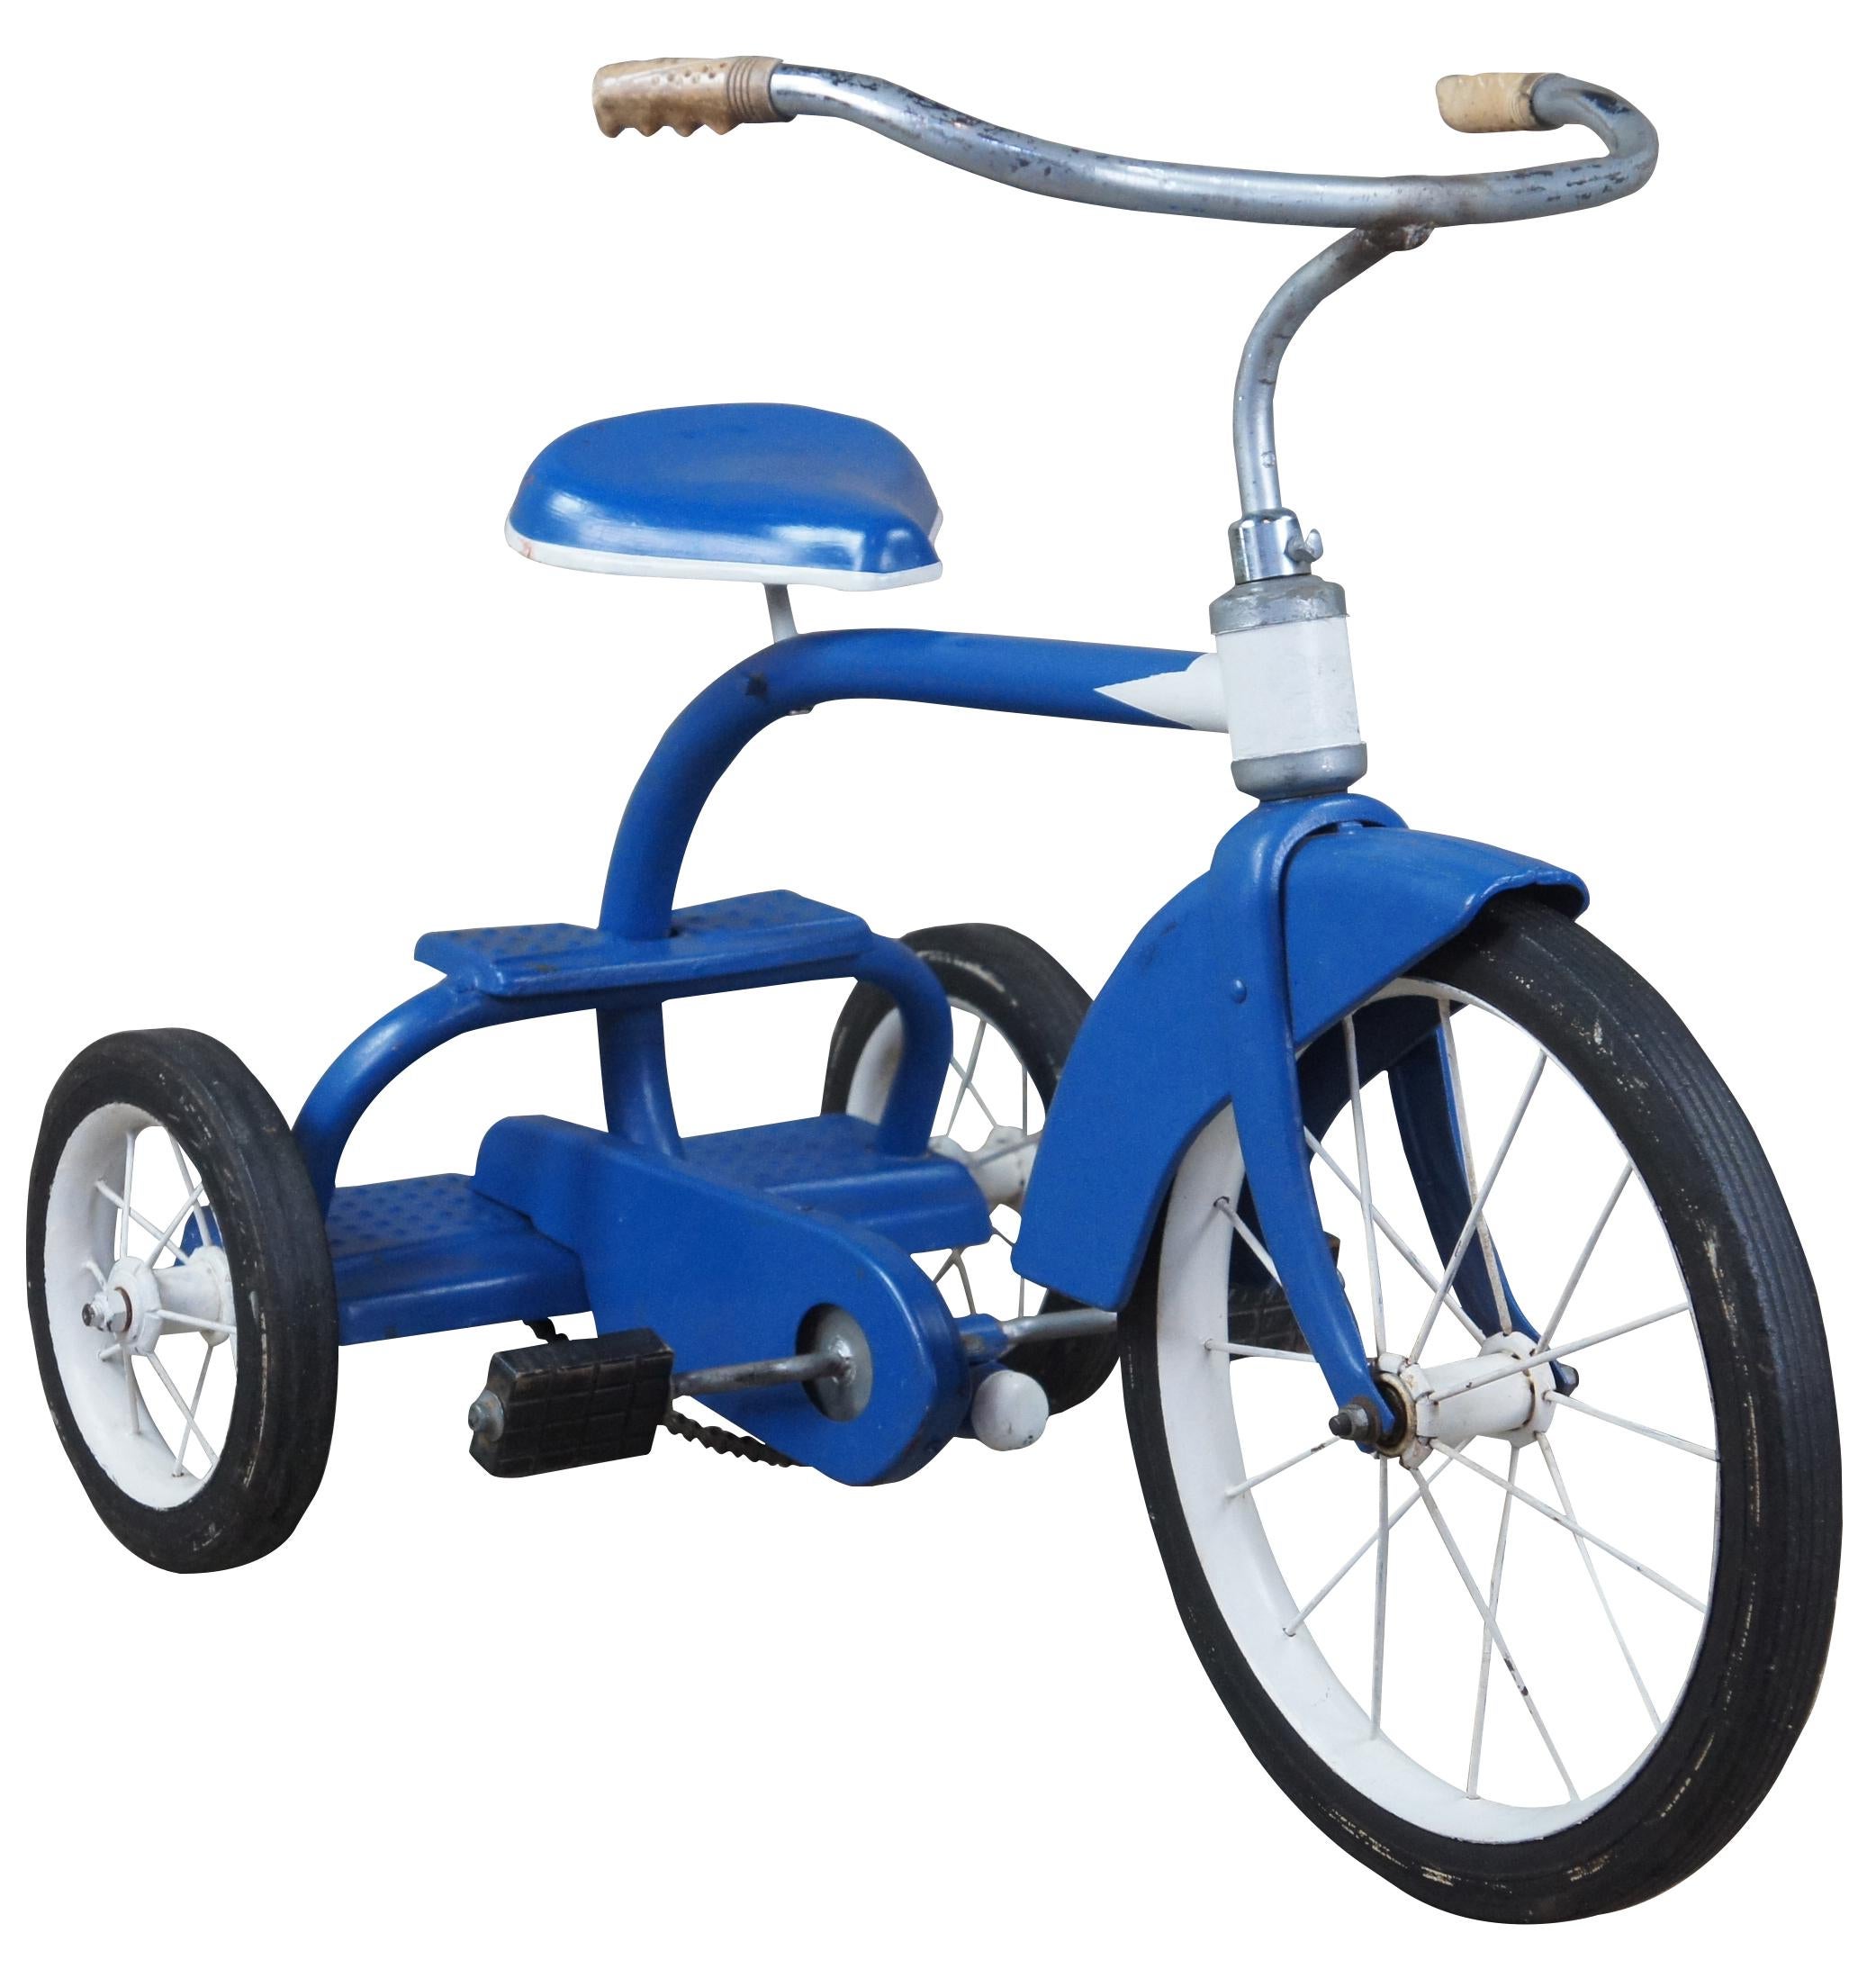 Vintage 1960s Western Flyer tricycle. Blue & White with black tires. Features a double step in the rear. Great for display and use!
   